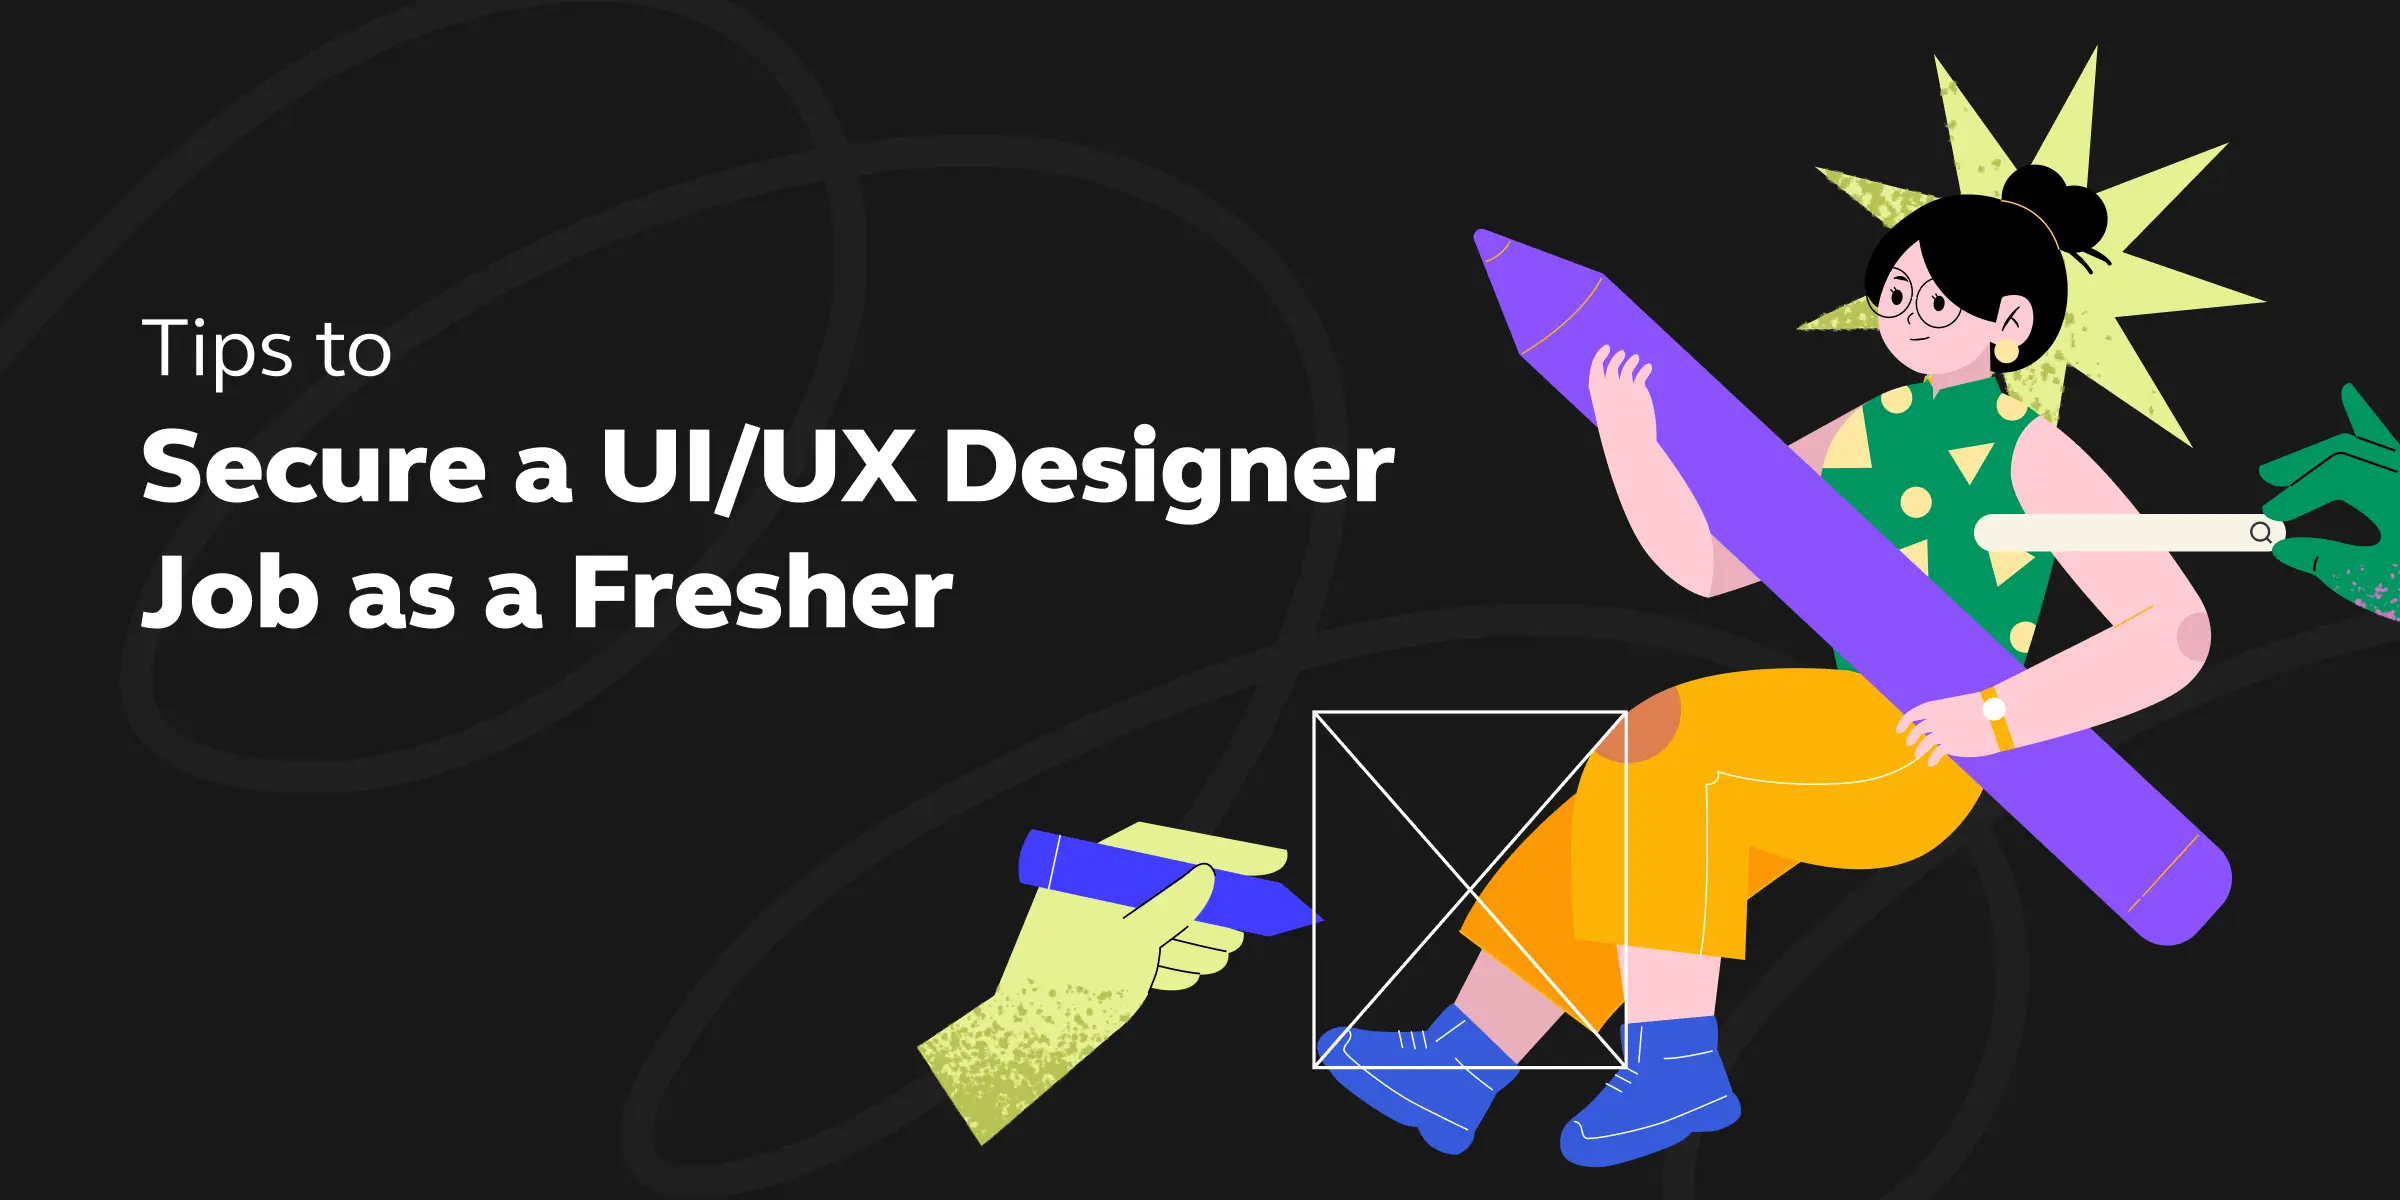 Tips to Secure a UI UX Designer Job as a Fresher